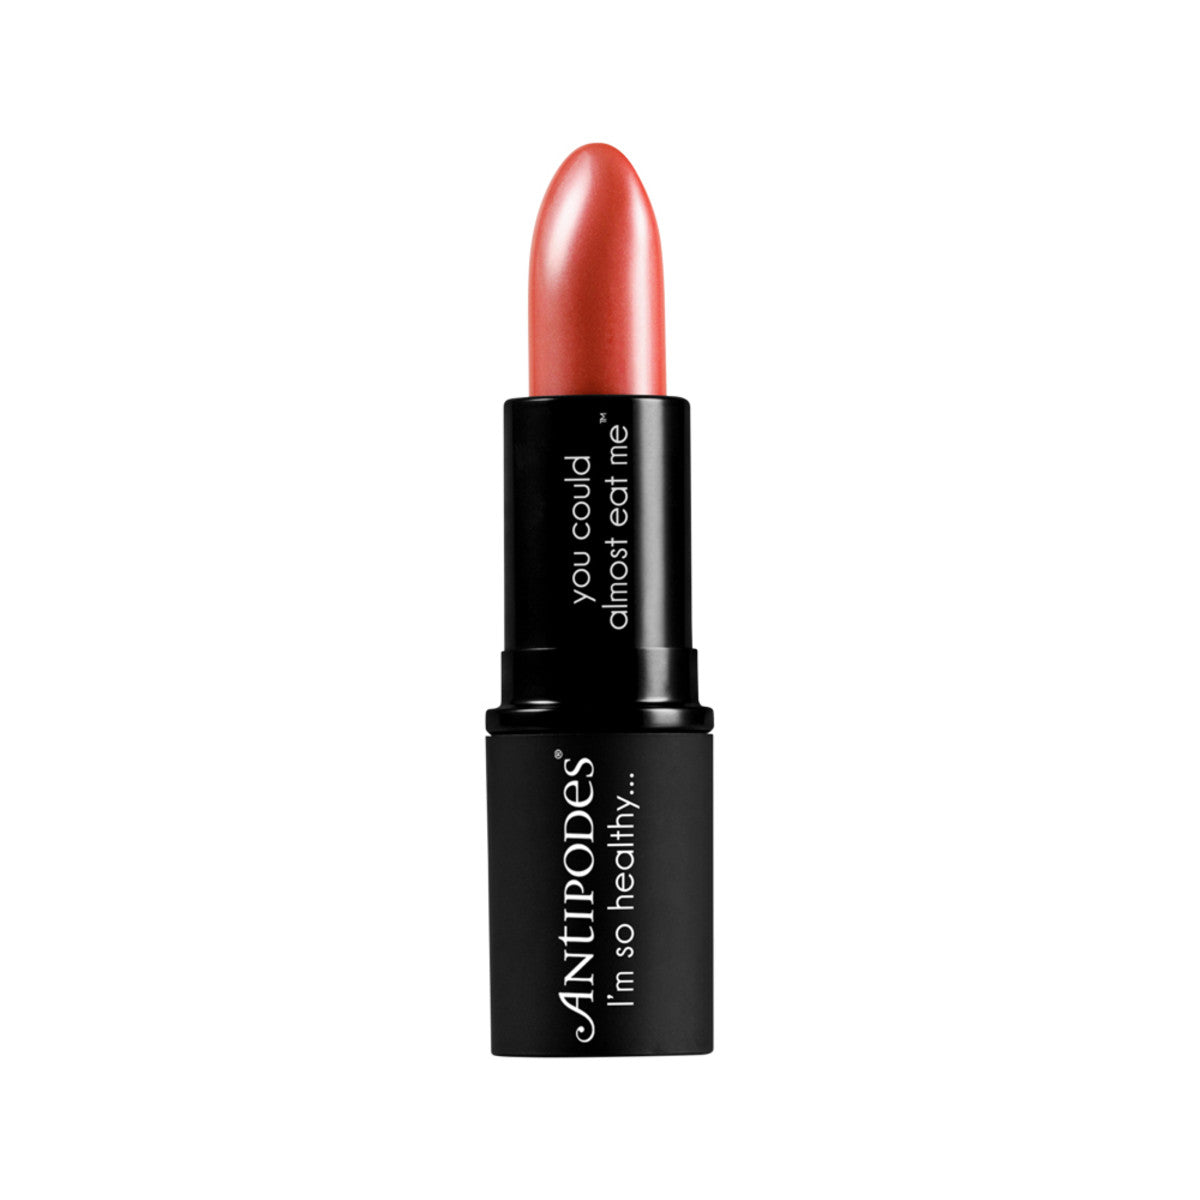 Antipodes Dusky Sound Pink Moisture-Boost Natural Lipstick 4g-The Living Co.